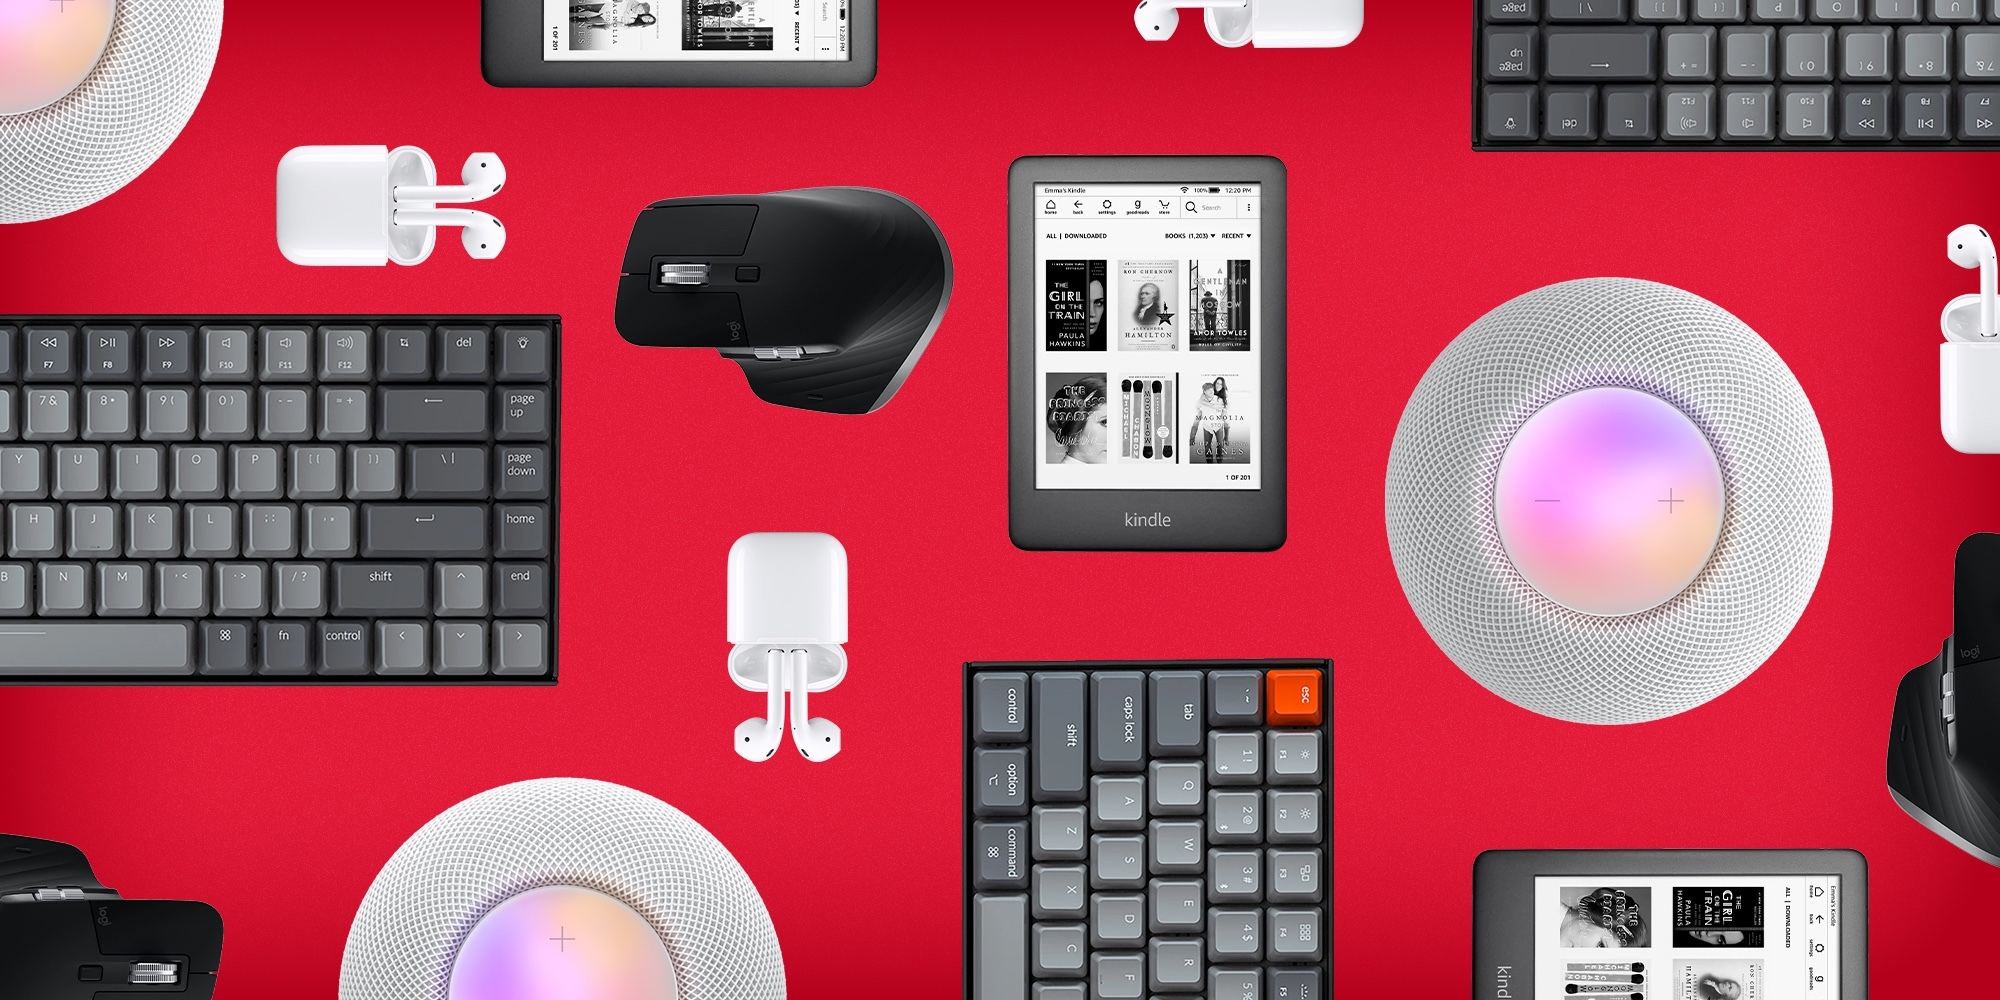 The best office gadget gifts for under $100